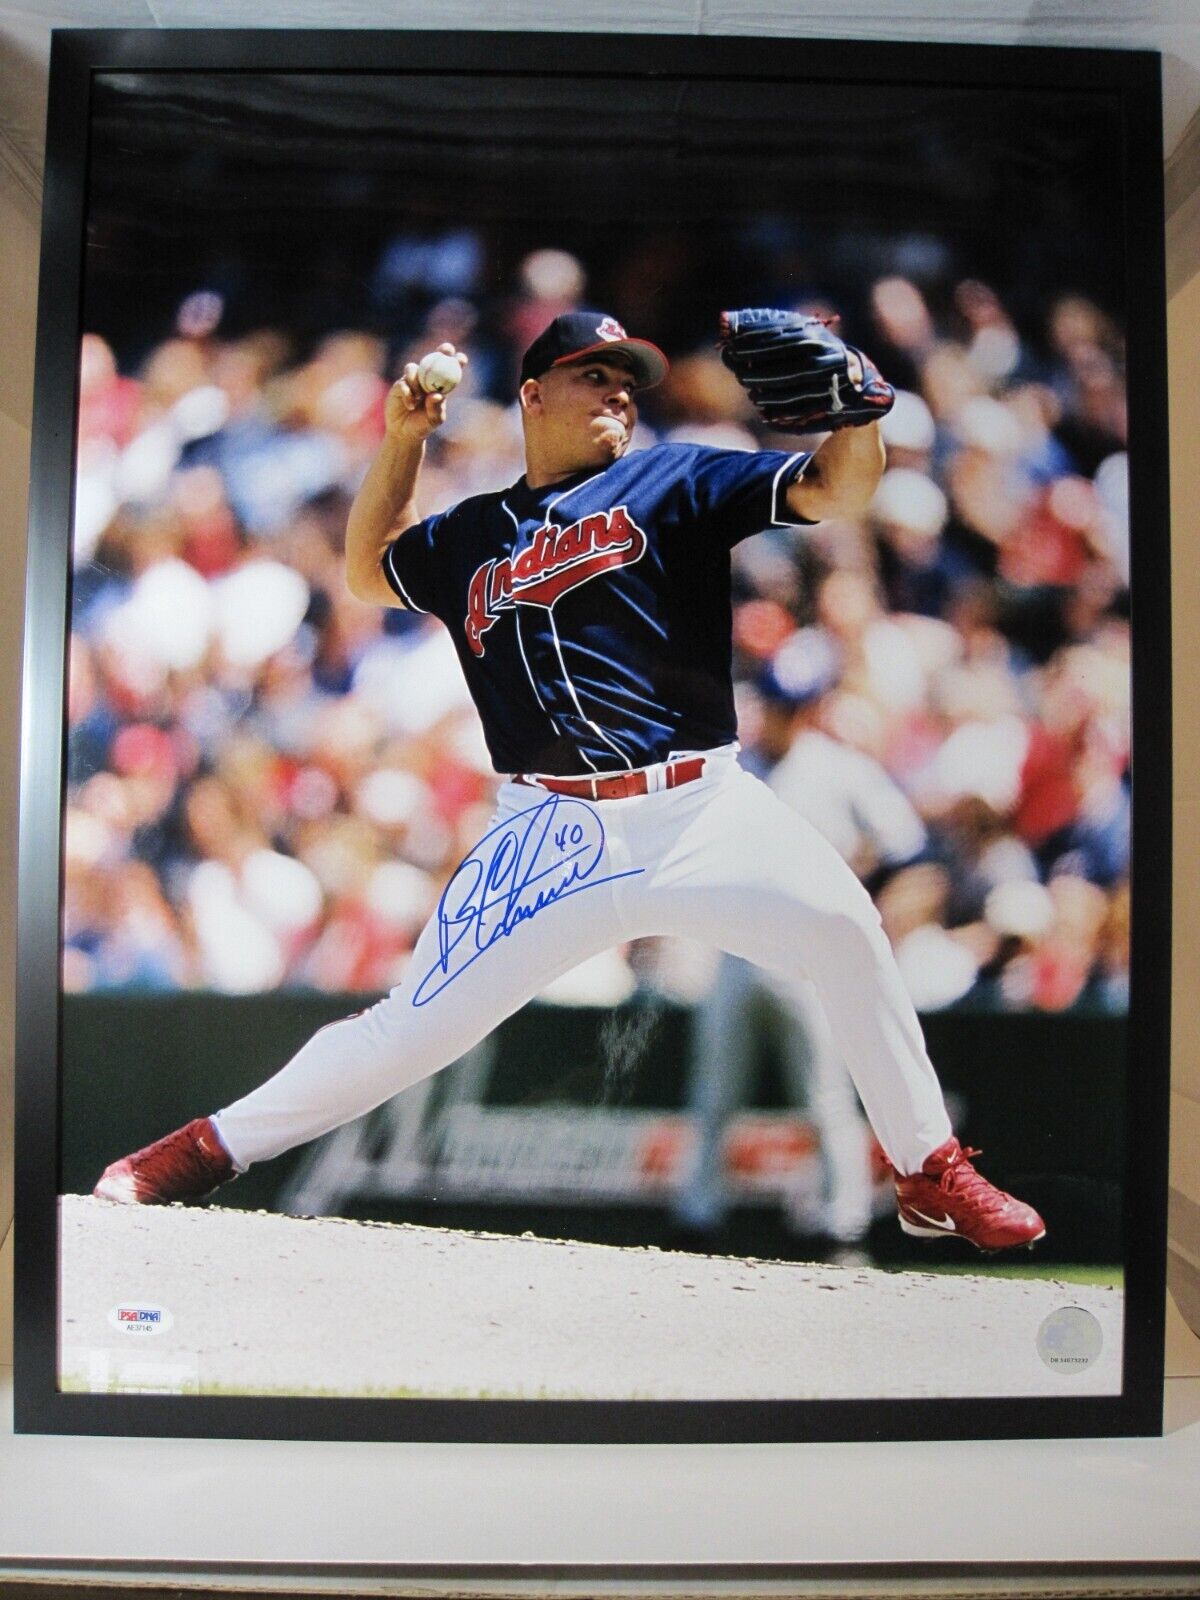 Signed & Framed - Bartolo Colon with PSA/DNA